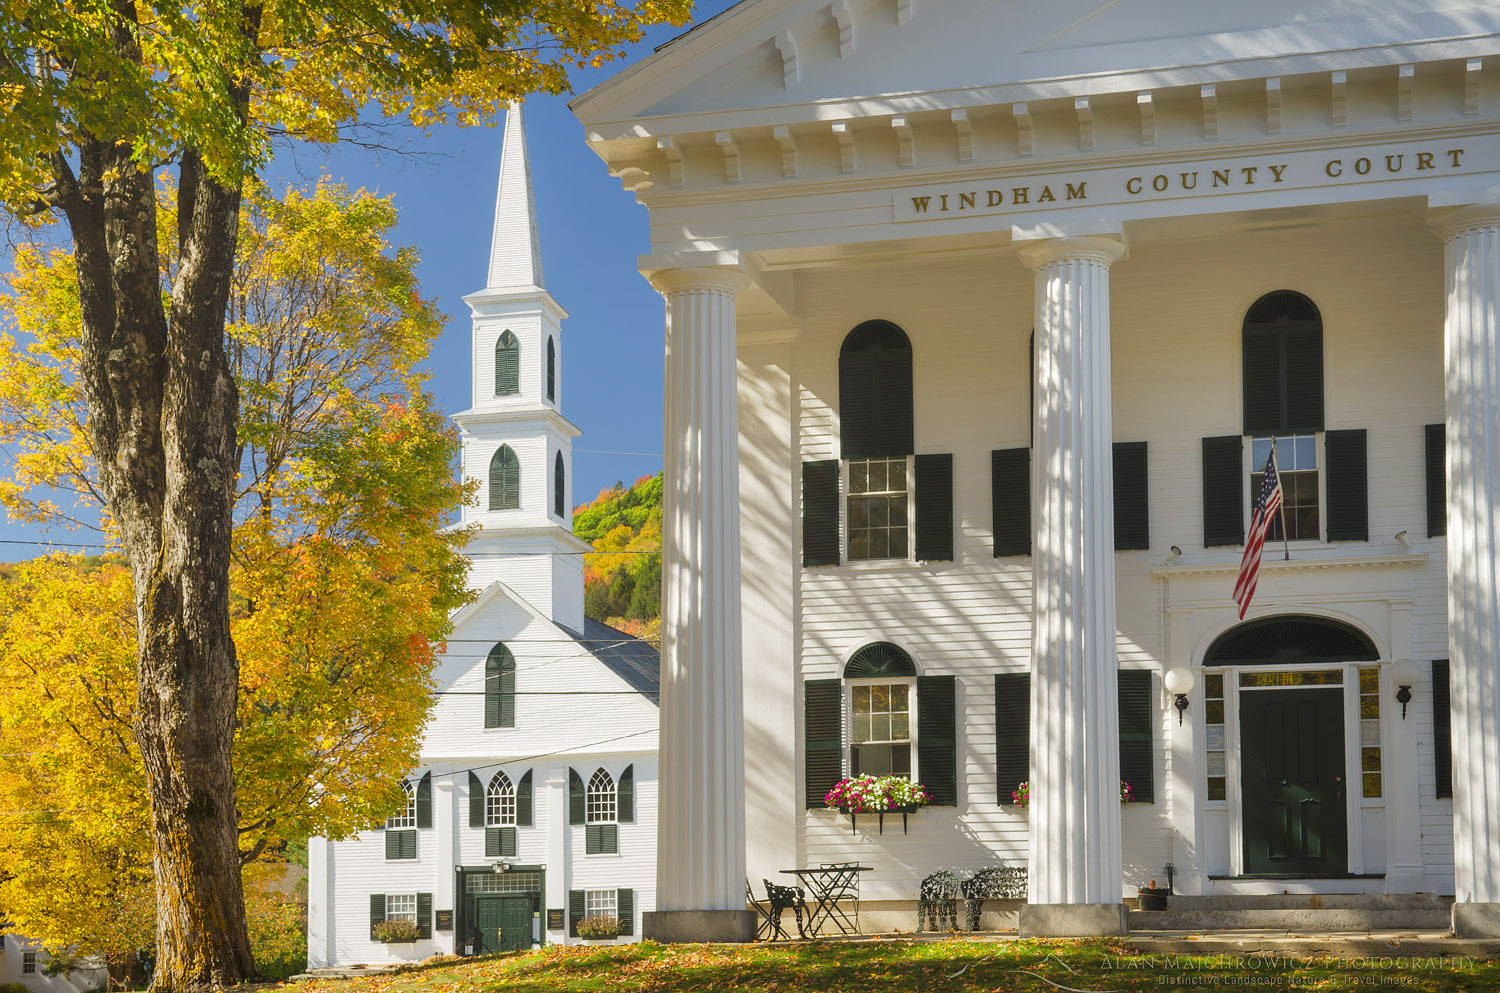 Windham County courthouse and church framed in golden fall foliage, Newfane, Vermont #59463